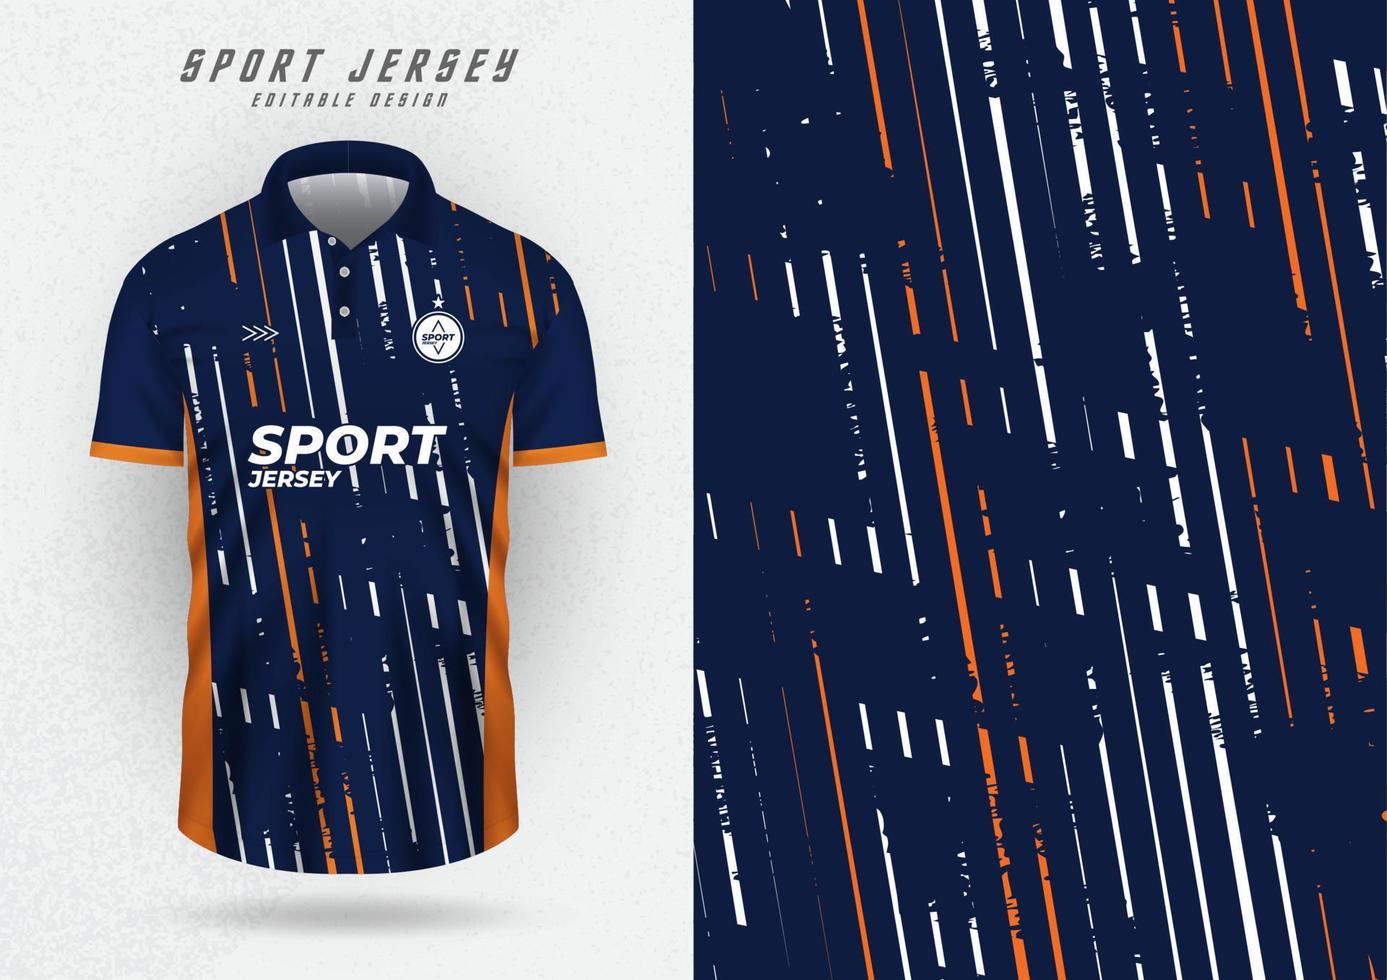 mockup background for sports jersey soccer running racing stripes navy blue vector